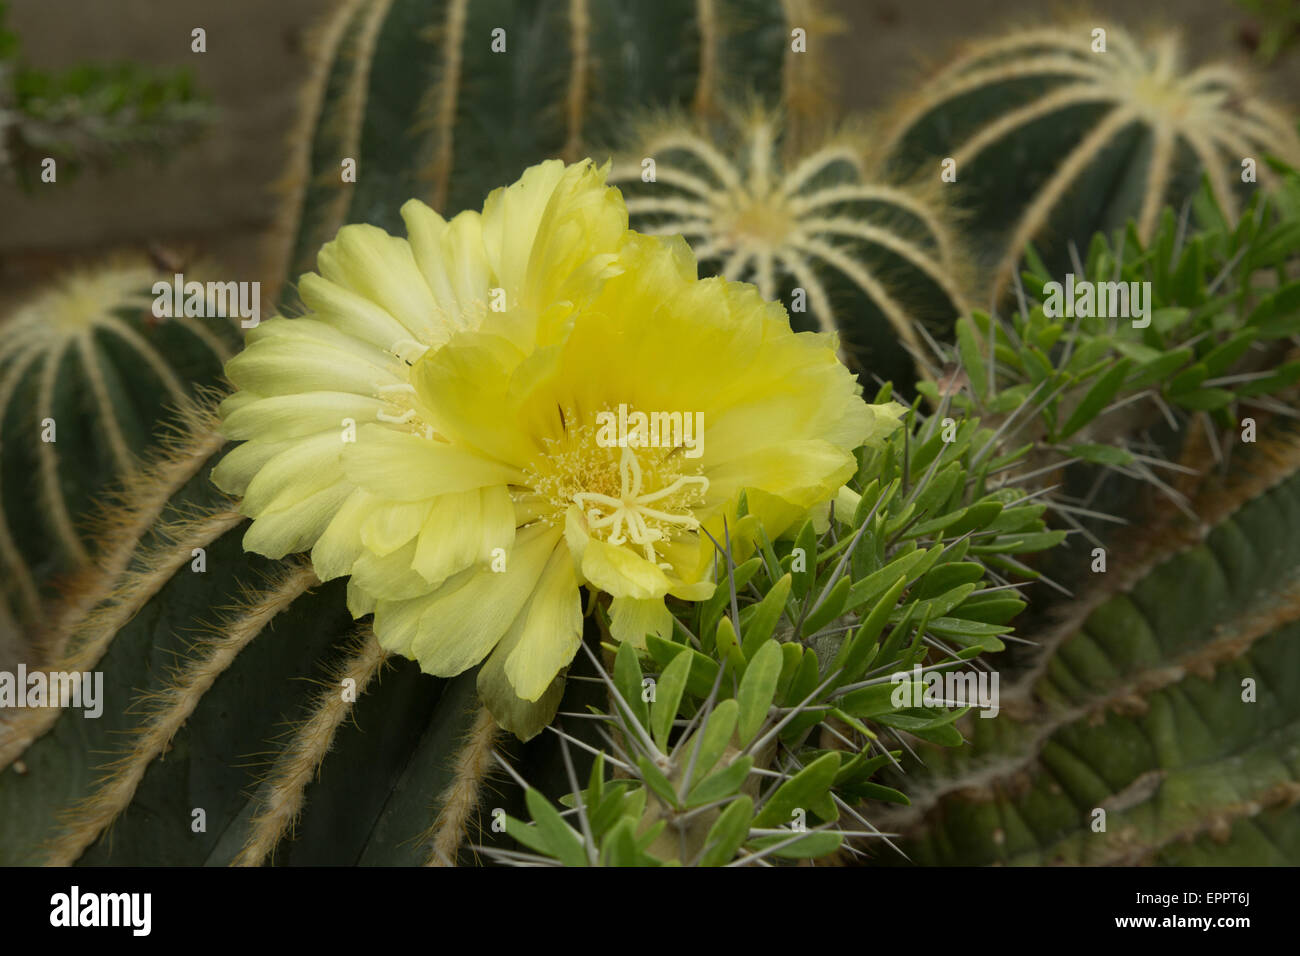 A photograph of a yellow cactus flower blooming. This particular cactus is a Parodia magnifica. Stock Photo